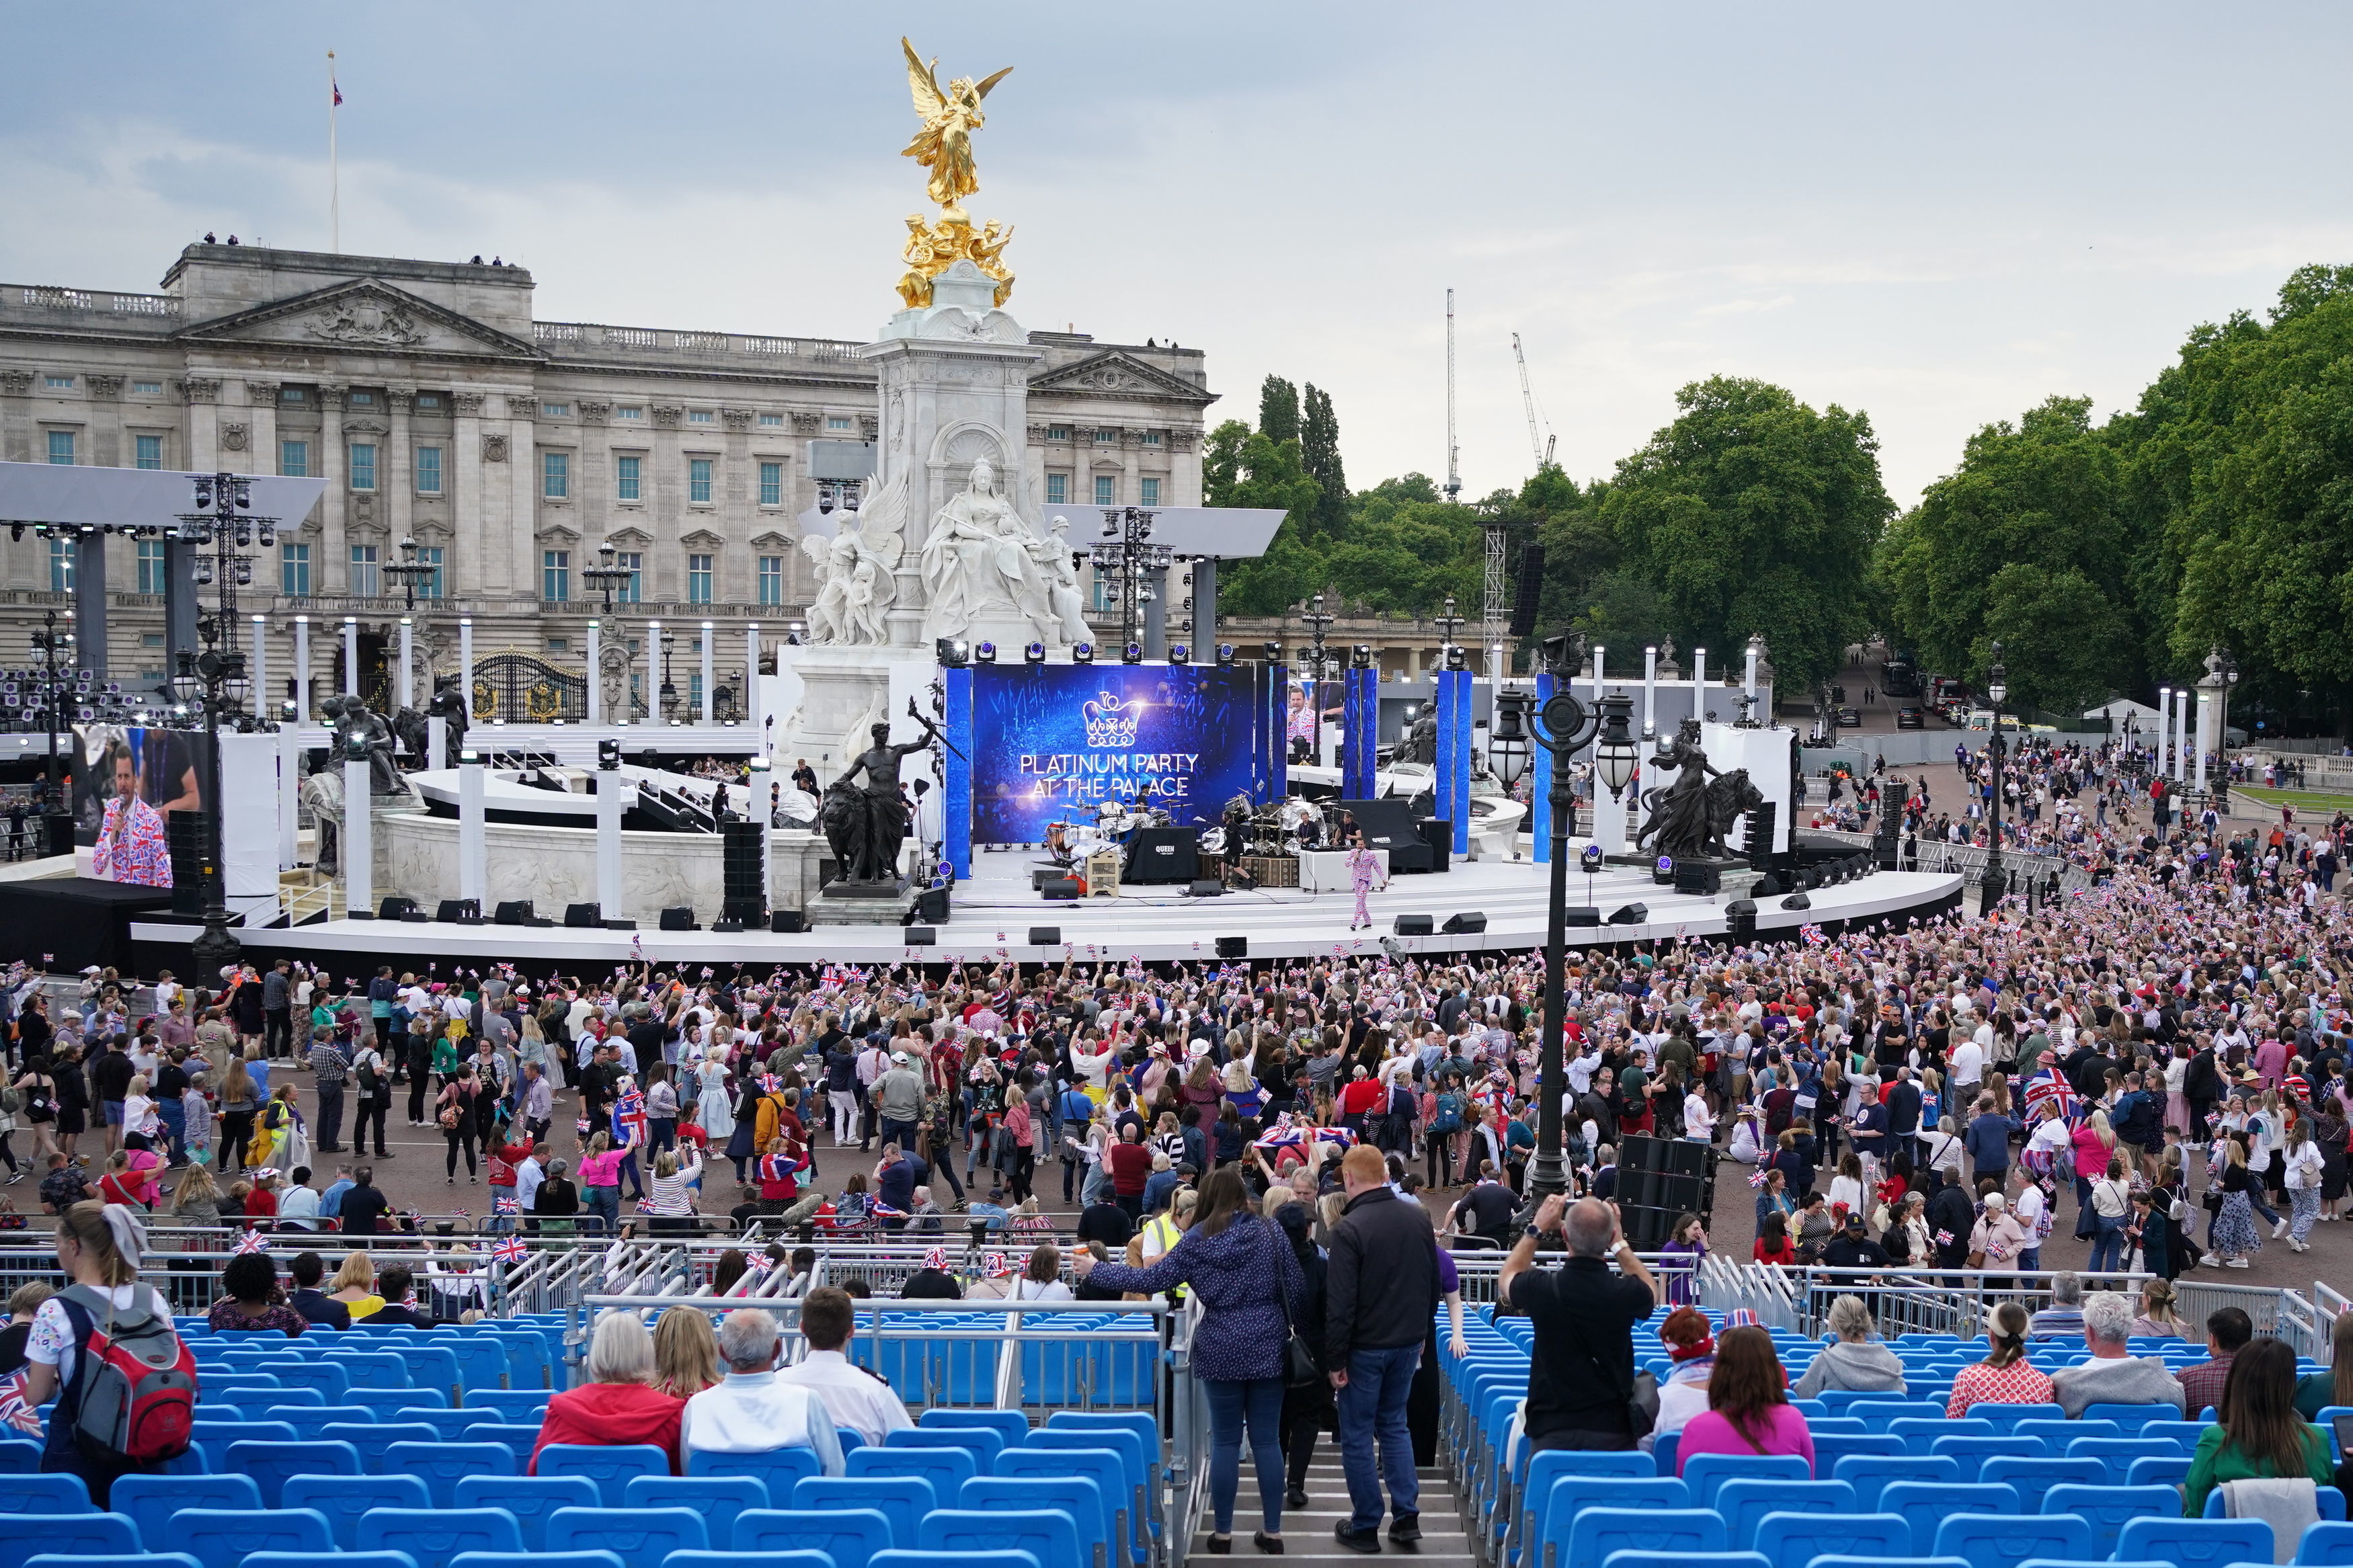 The crowd arriving before the start of the Platinum Party at the Palace in front of Buckingham Palace